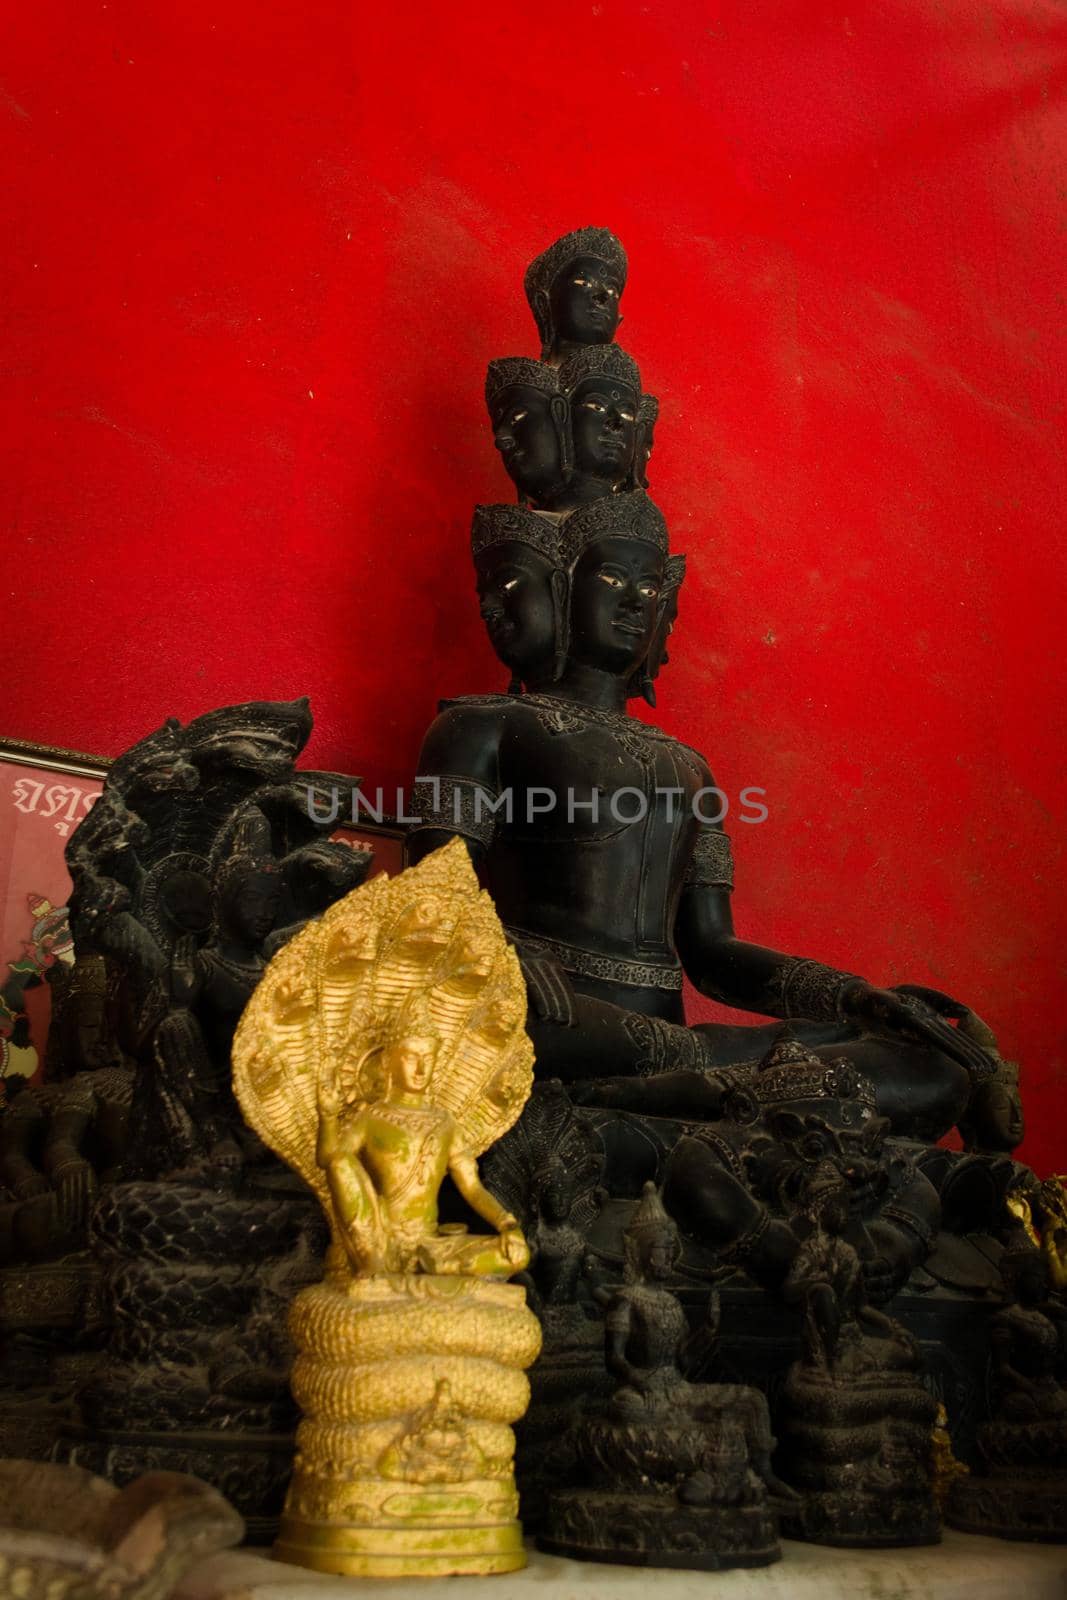 Statue of a buddhist asura, a demigod with many faces, on display in a temple in Phuket, Thailand. by hernan_hyper